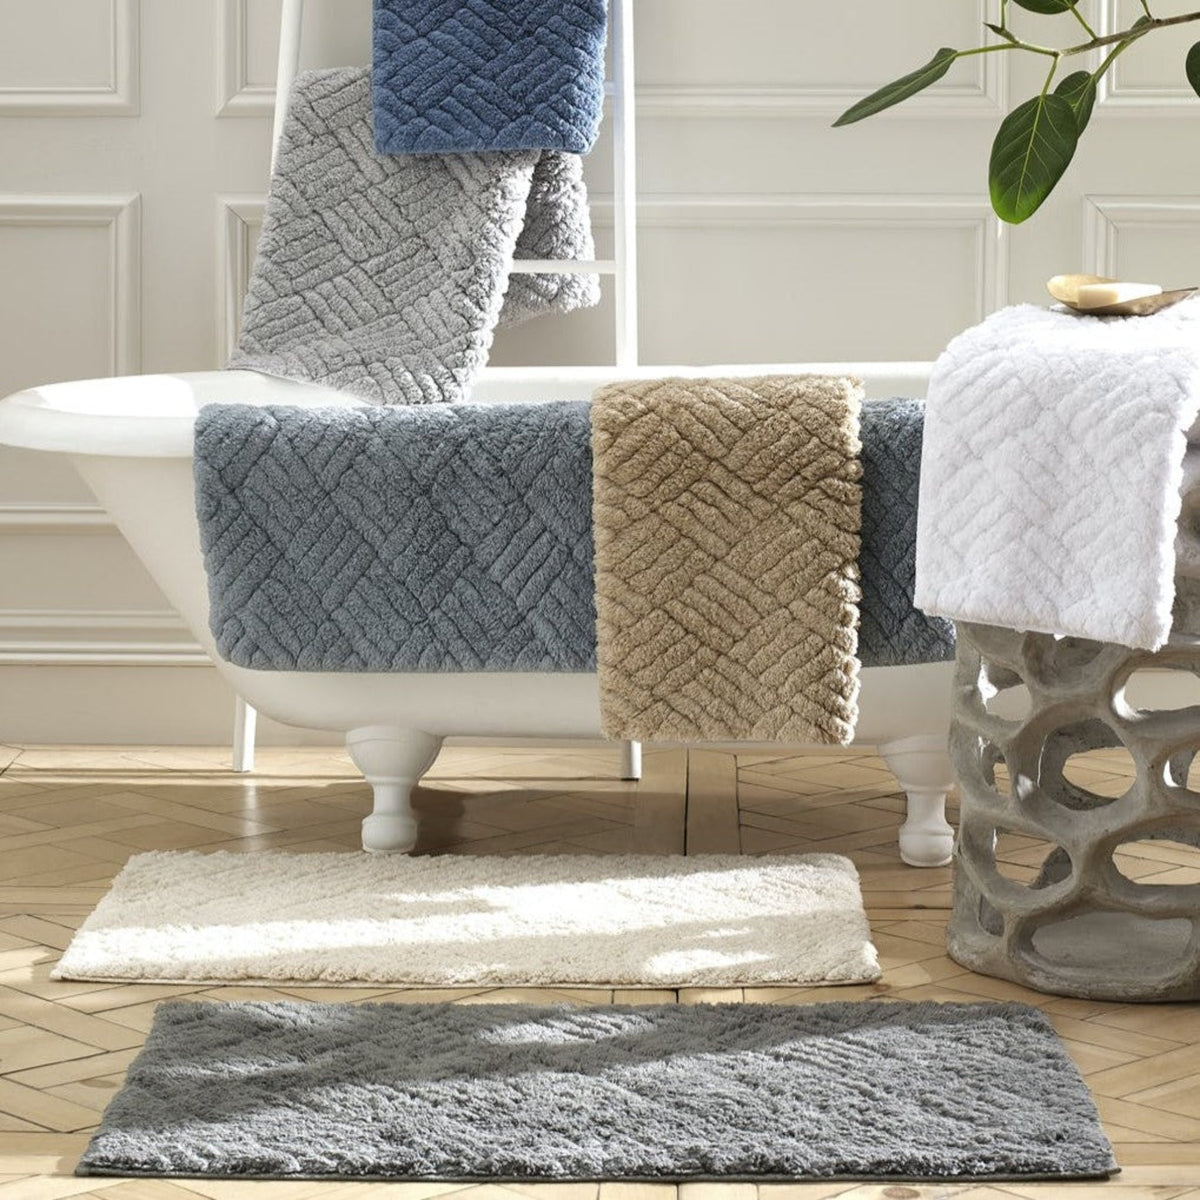 Different Colors of Matouk Cairo Bath Rugs in Lifestyle